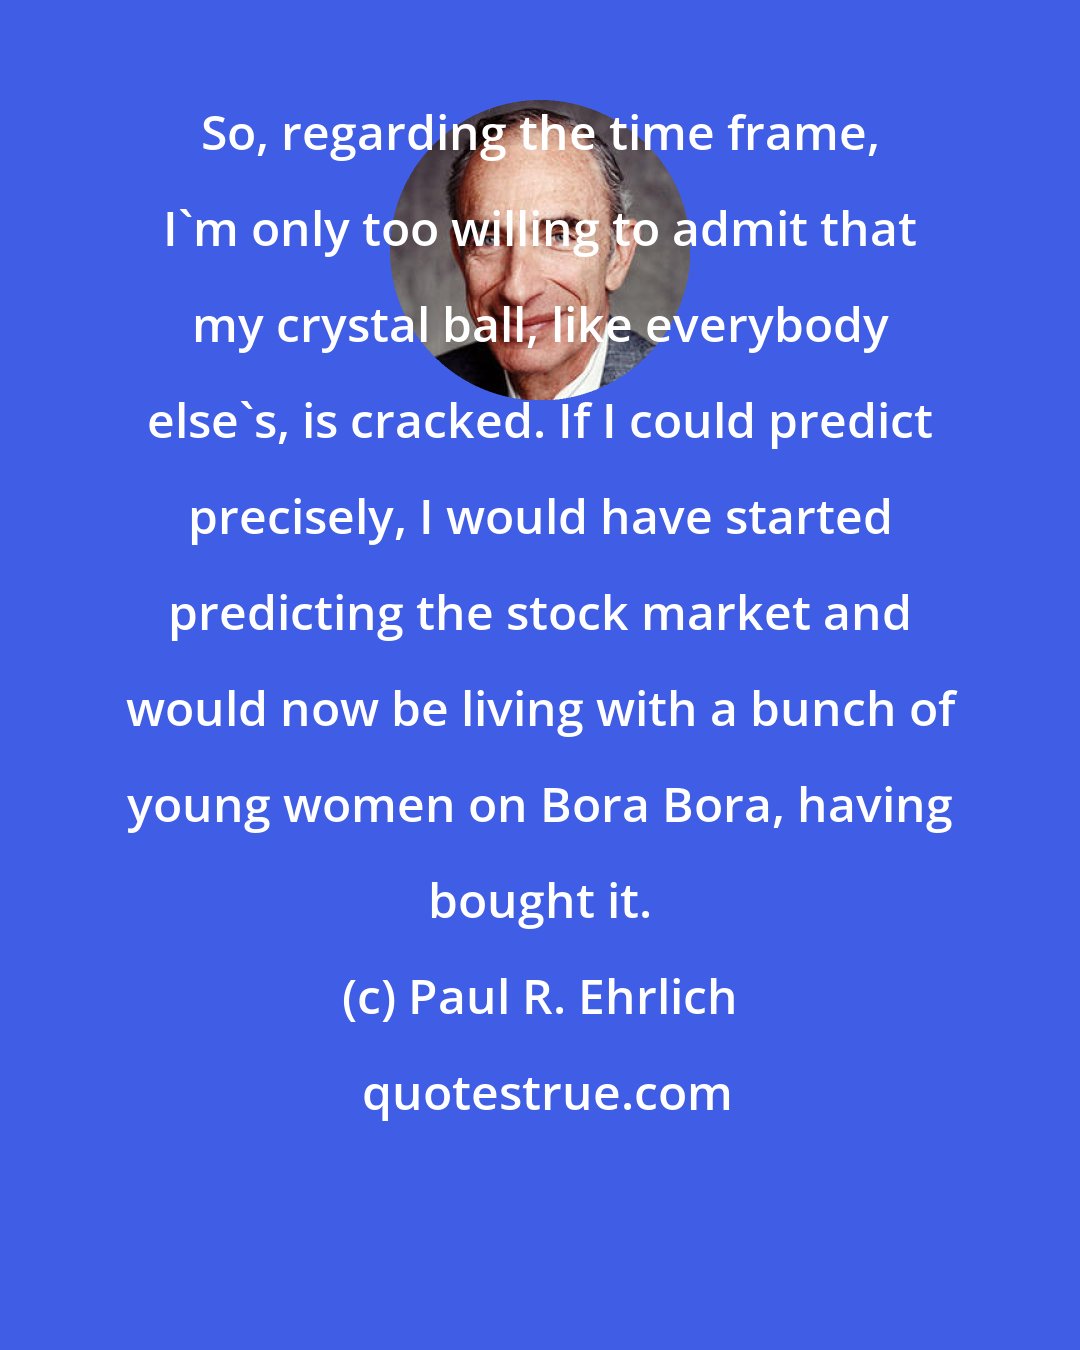 Paul R. Ehrlich: So, regarding the time frame, I'm only too willing to admit that my crystal ball, like everybody else's, is cracked. If I could predict precisely, I would have started predicting the stock market and would now be living with a bunch of young women on Bora Bora, having bought it.